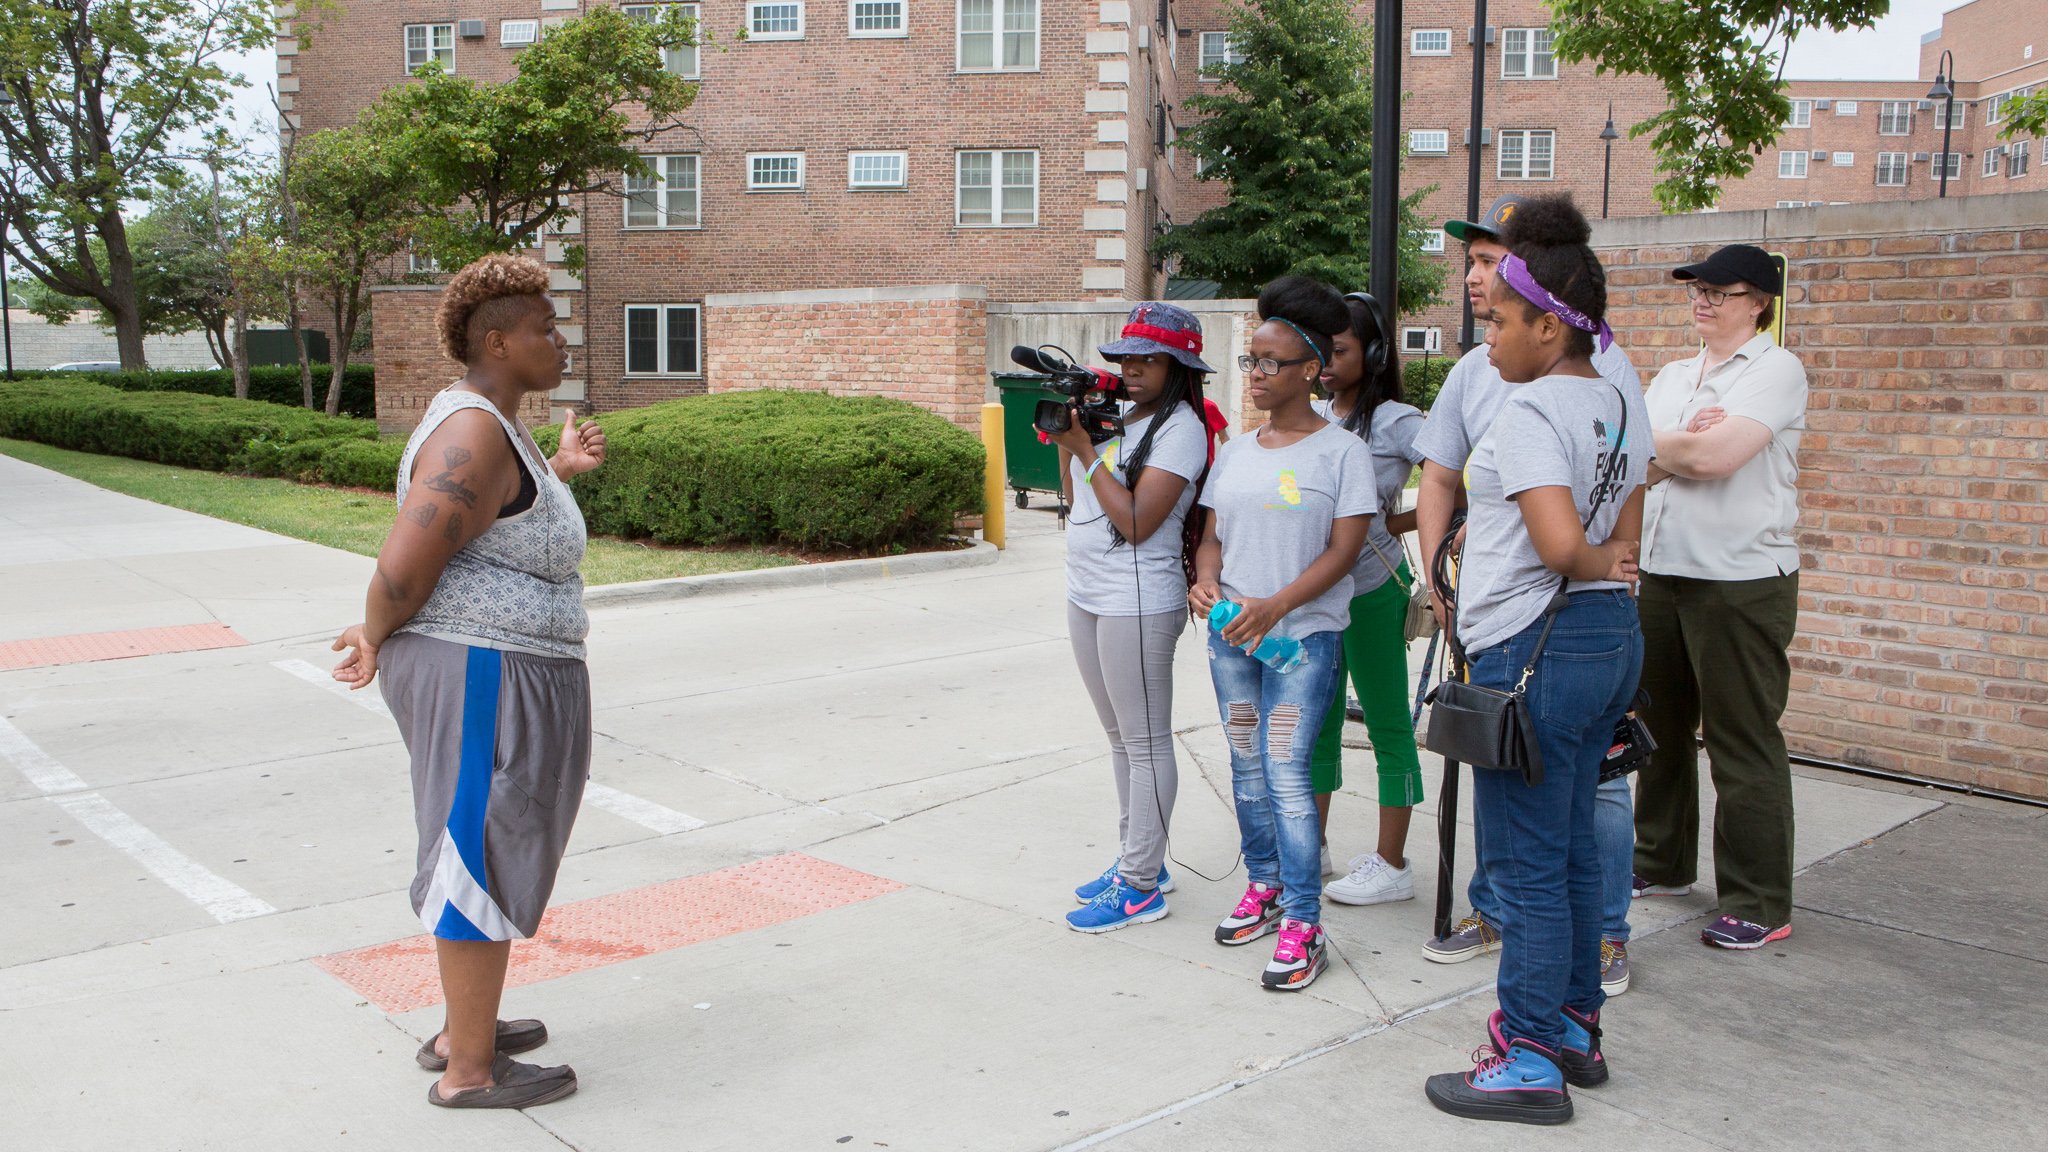 Young filmmakers work on a documentary about teen pregnancy at Dearborn Homes, a public housing community in Bronzeville. The film was one of four produced this summer as part of a new program between the Chicago Housing Authority and DePaul University. (Courtesy of Liliane Calfee)